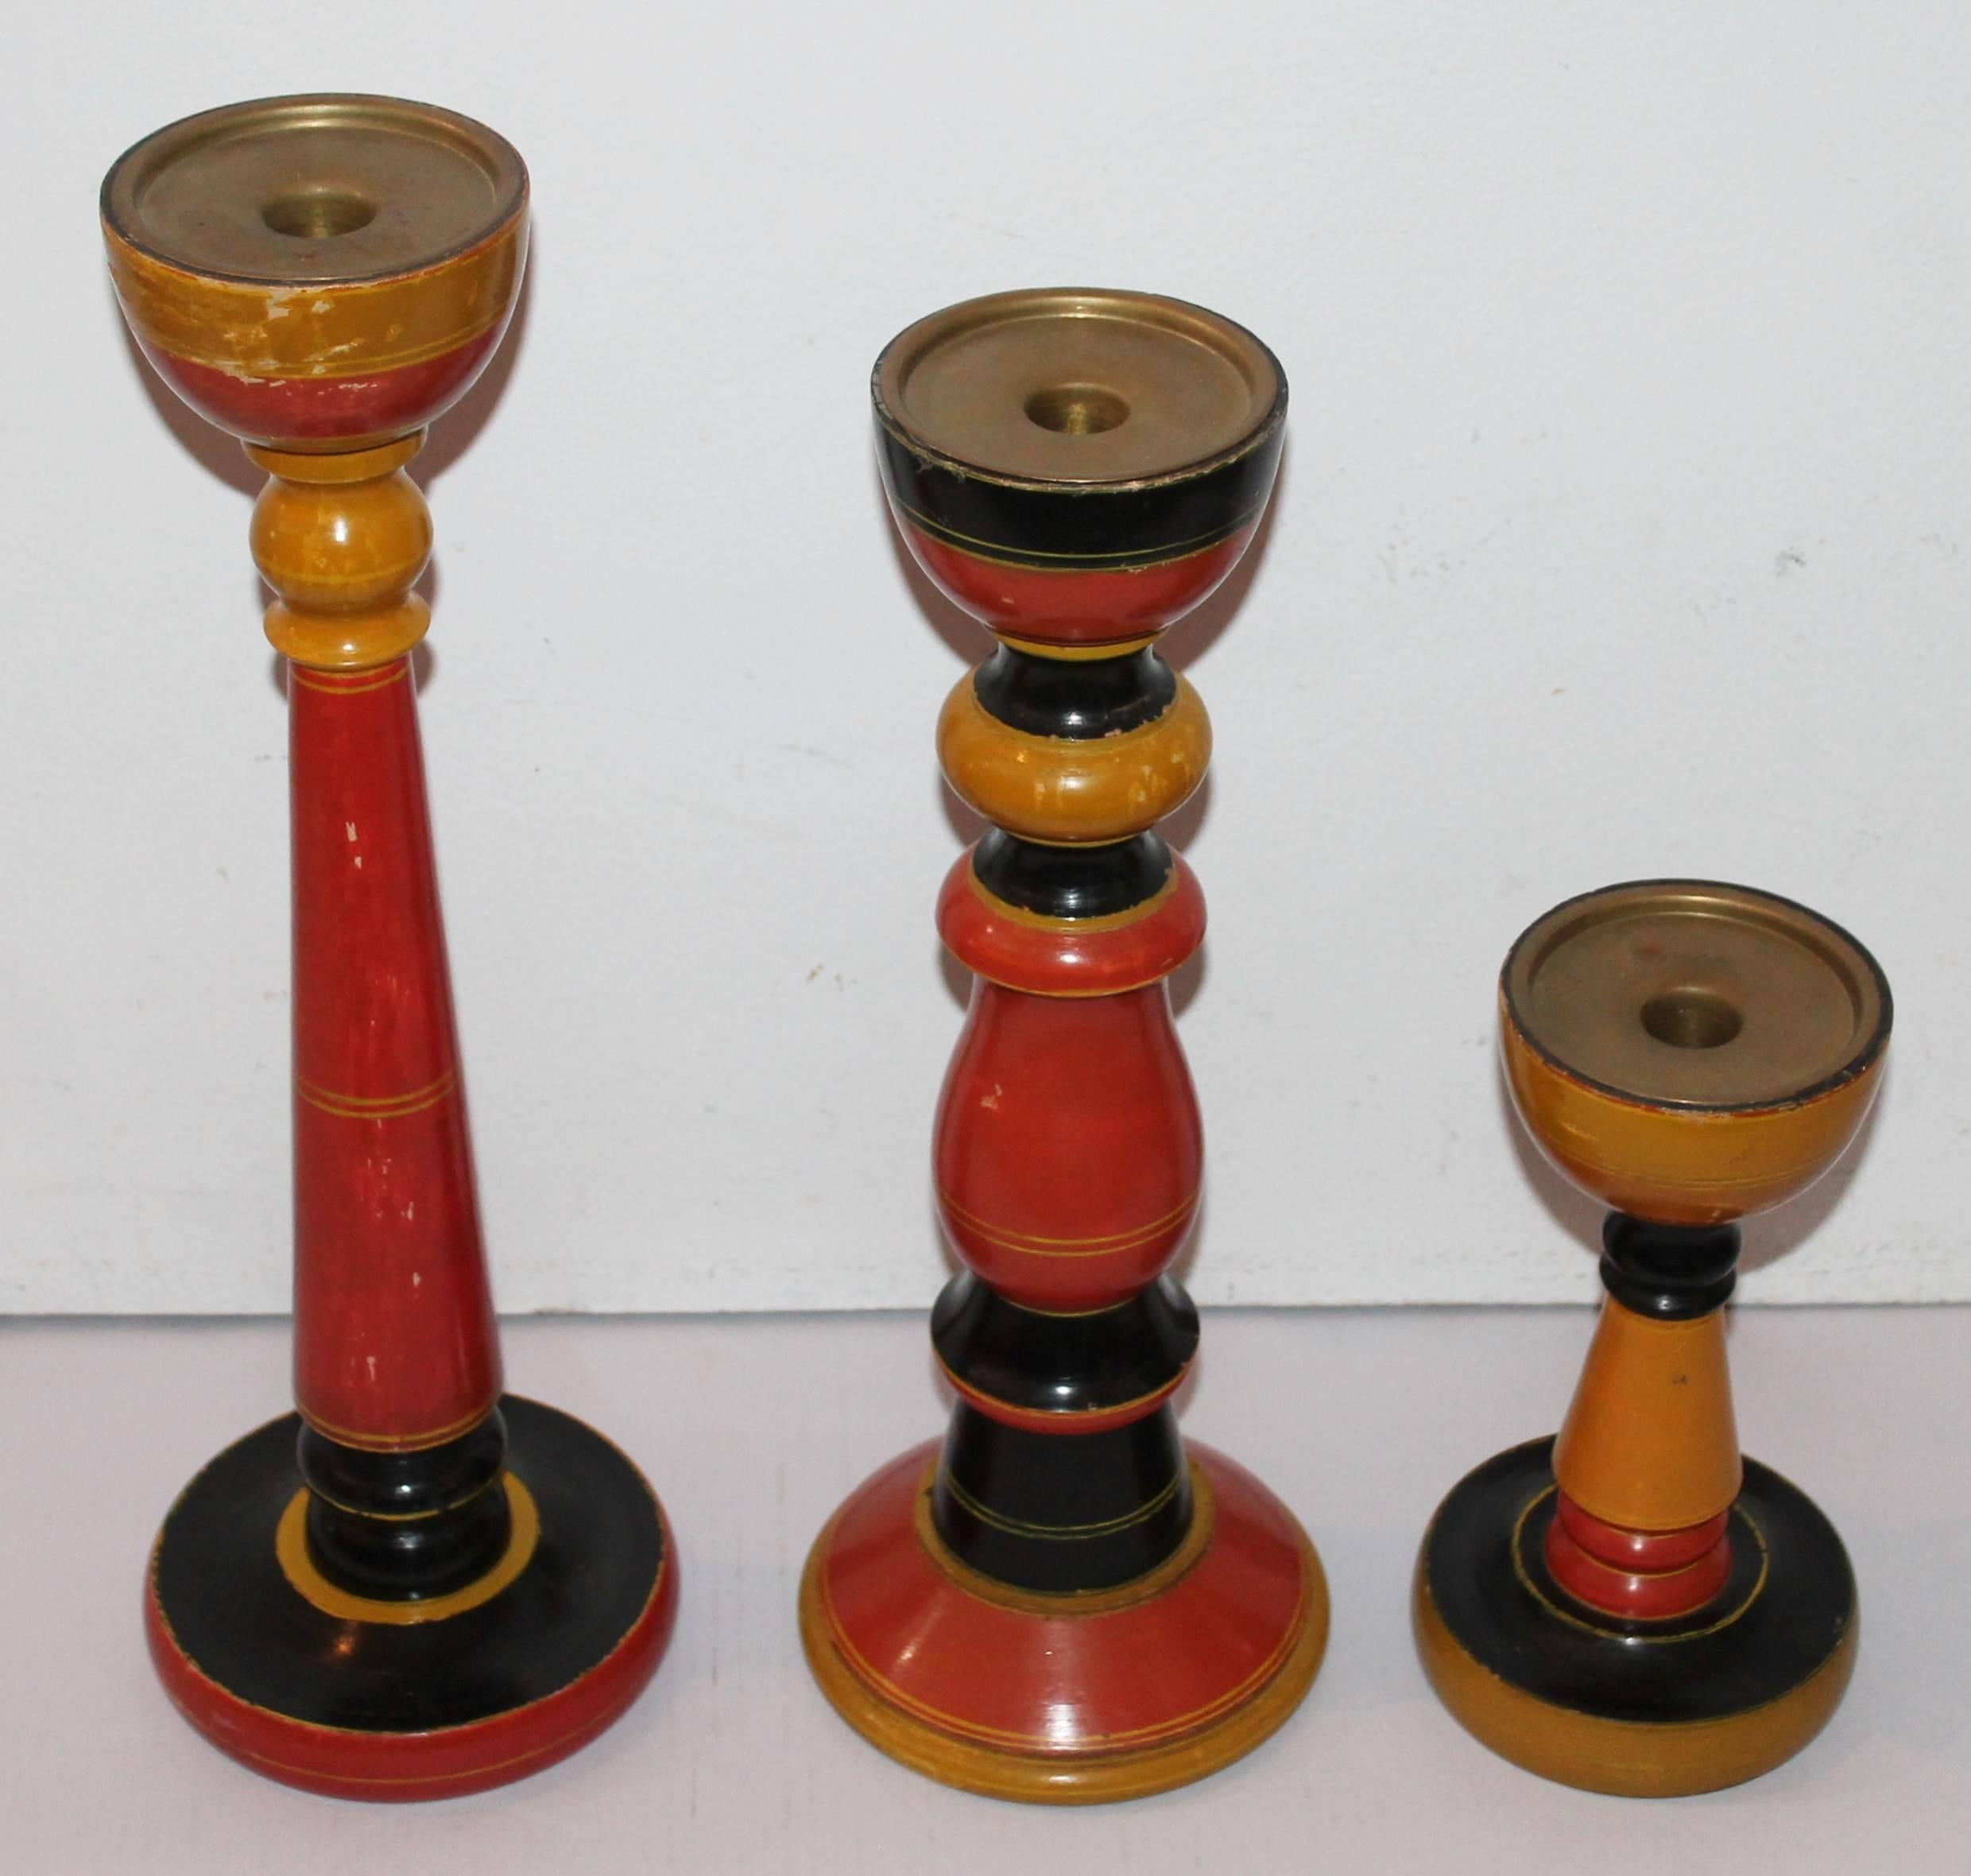 This collection of three southwestern original painted wood candle stick holders. The condition is very good. Sold as a set of three. The insert skirt is brass. Measures: The first is 9" high x 4.5" wide. Second is 15" x 5.5".